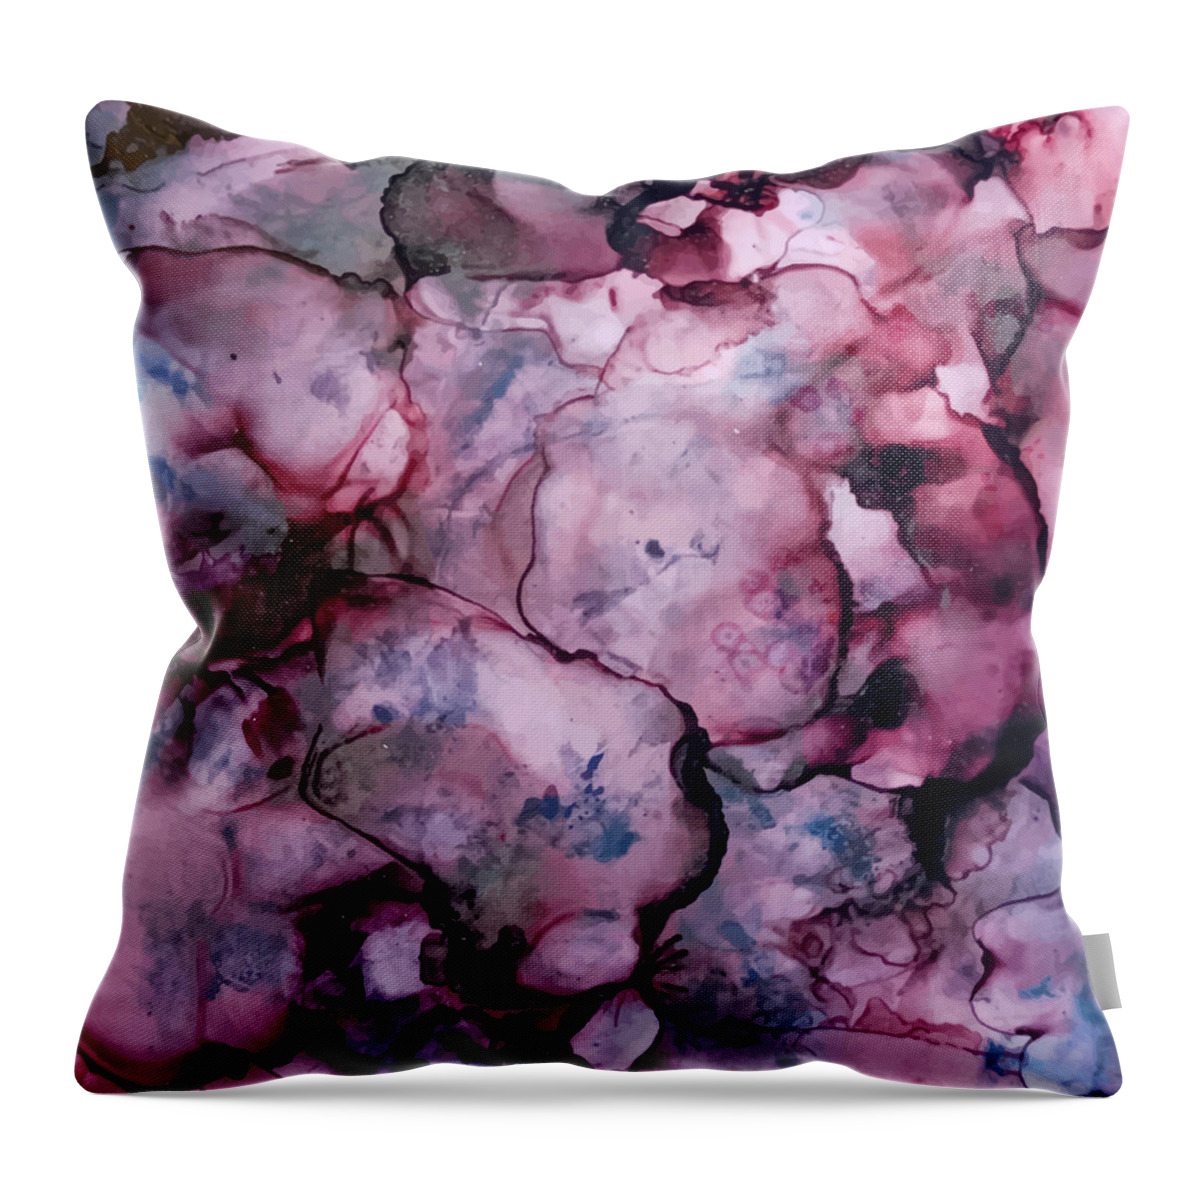 Abstract Throw Pillow featuring the digital art Abstract Dark Blue Pink Ink Liquid by Sambel Pedes